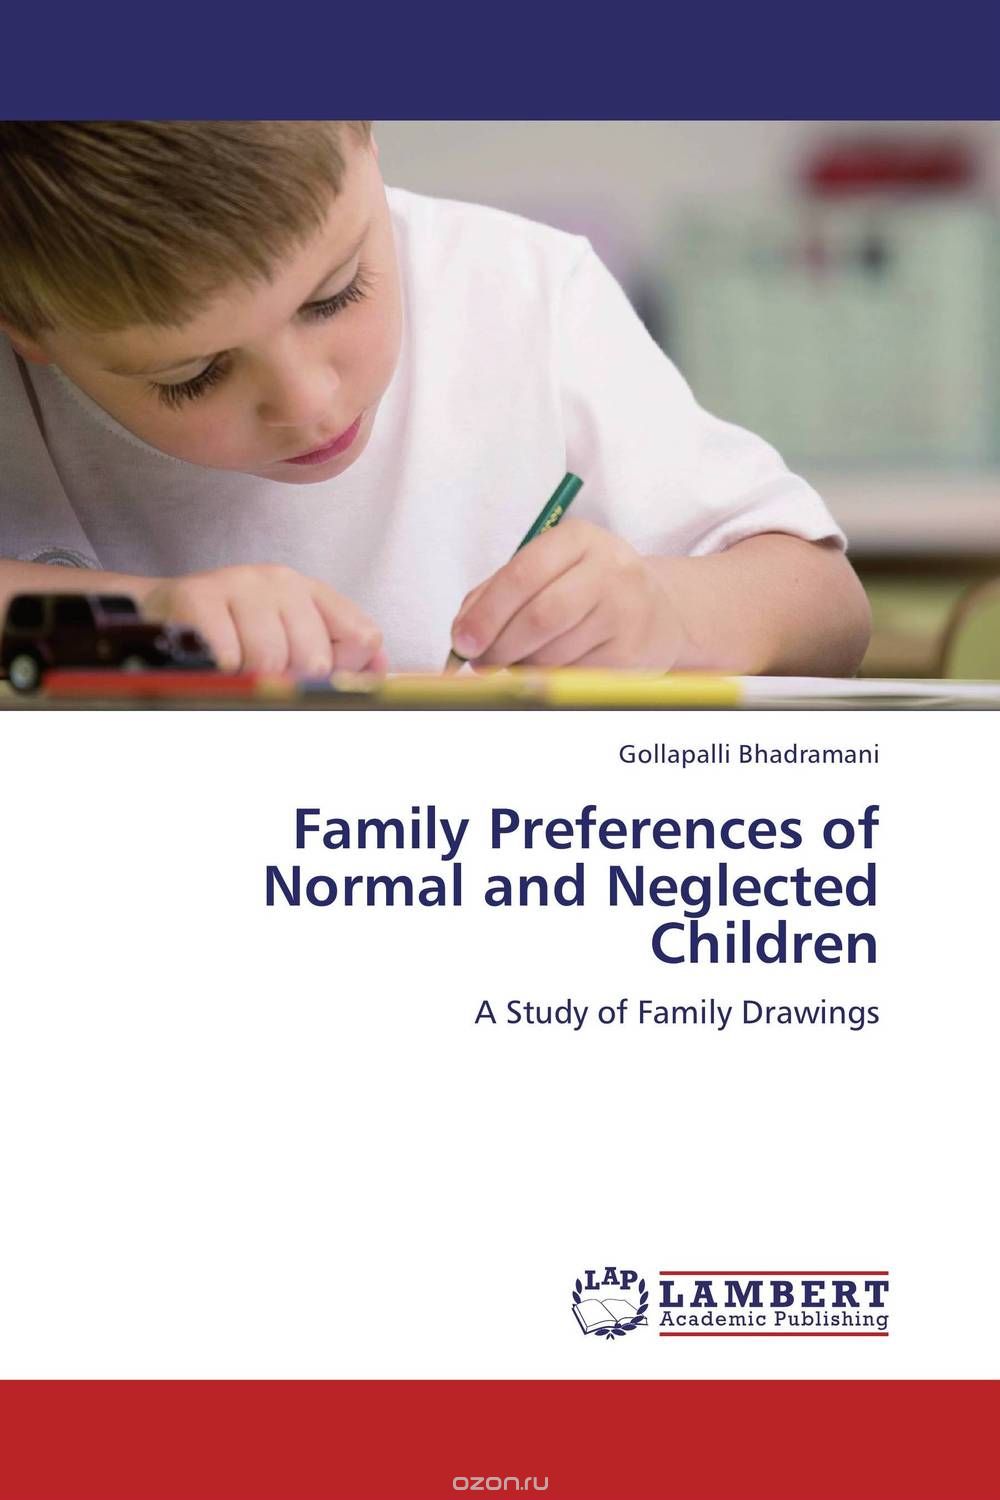 Скачать книгу "Family Preferences of Normal and Neglected Children"